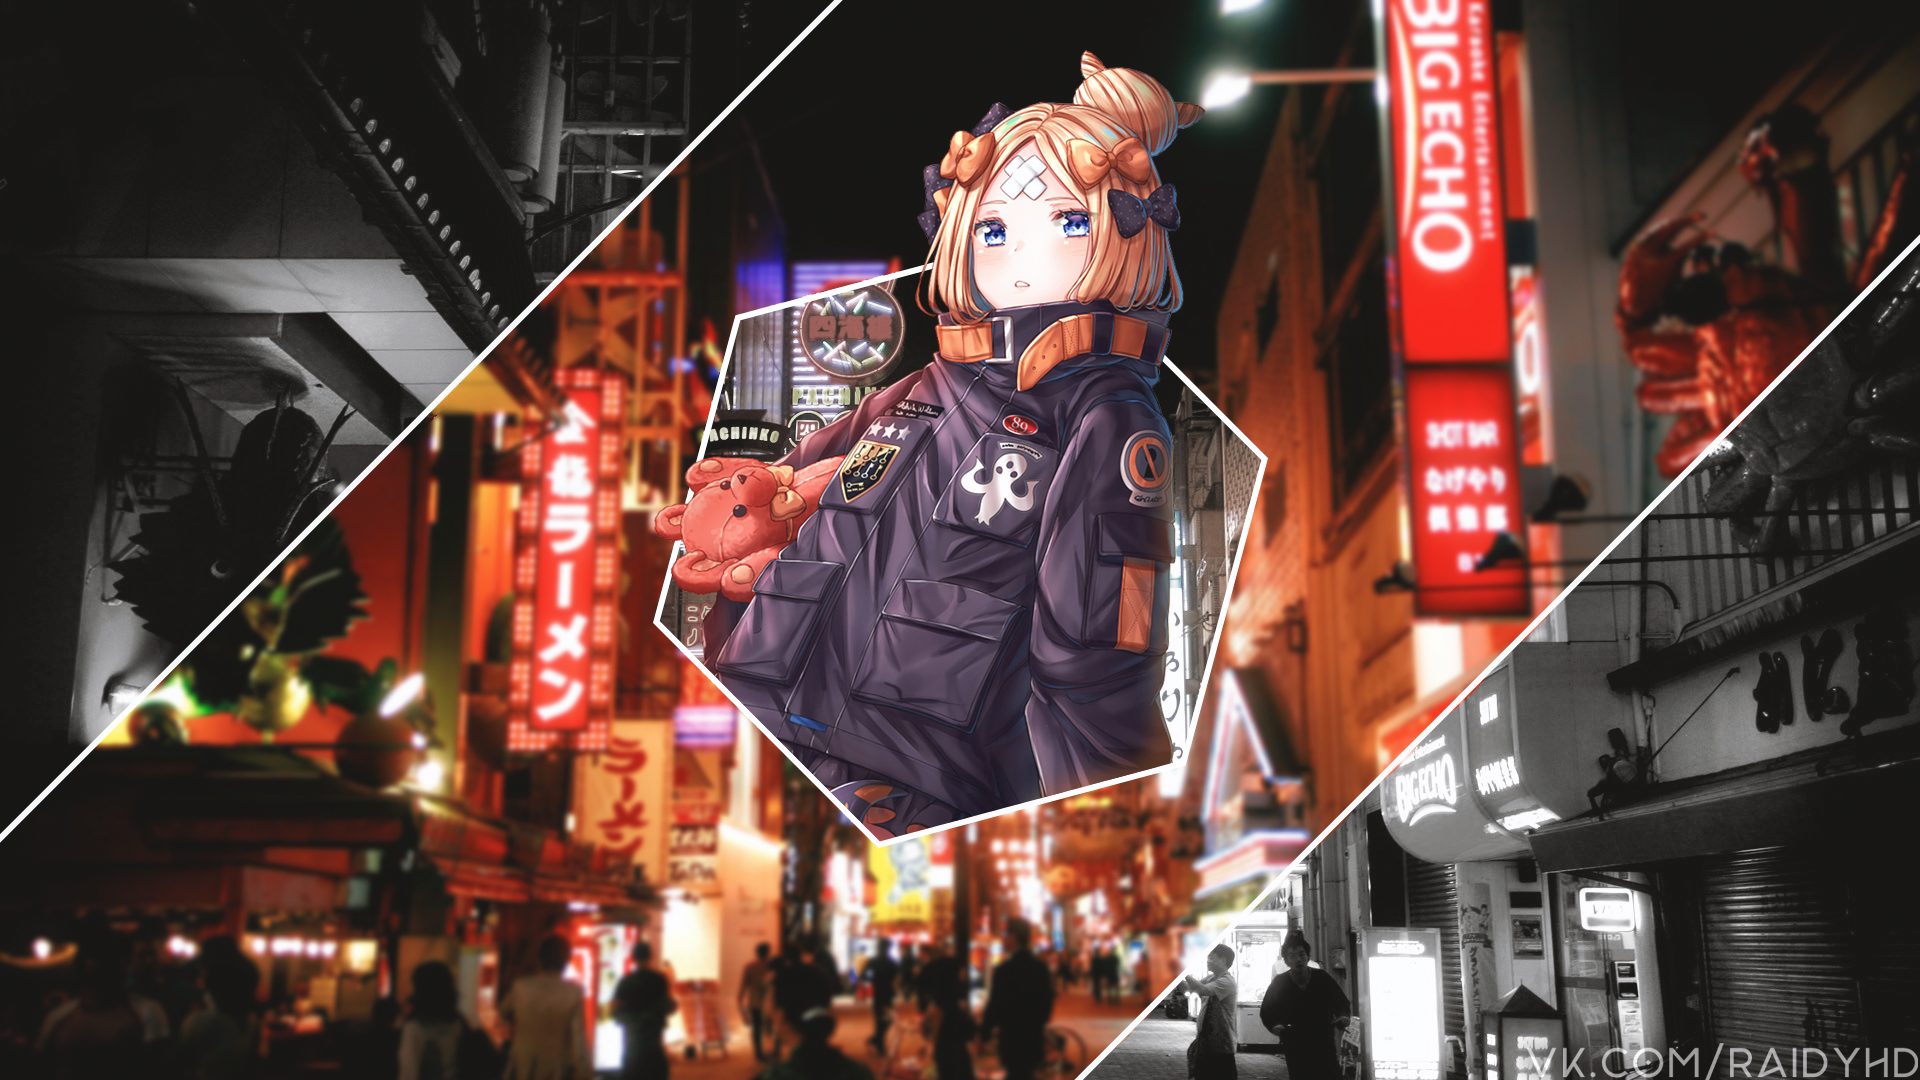 Anime 1920x1080 anime anime girls picture-in-picture Abigail Williams (Fate/Grand Order) Fate series Fate/Grand Order